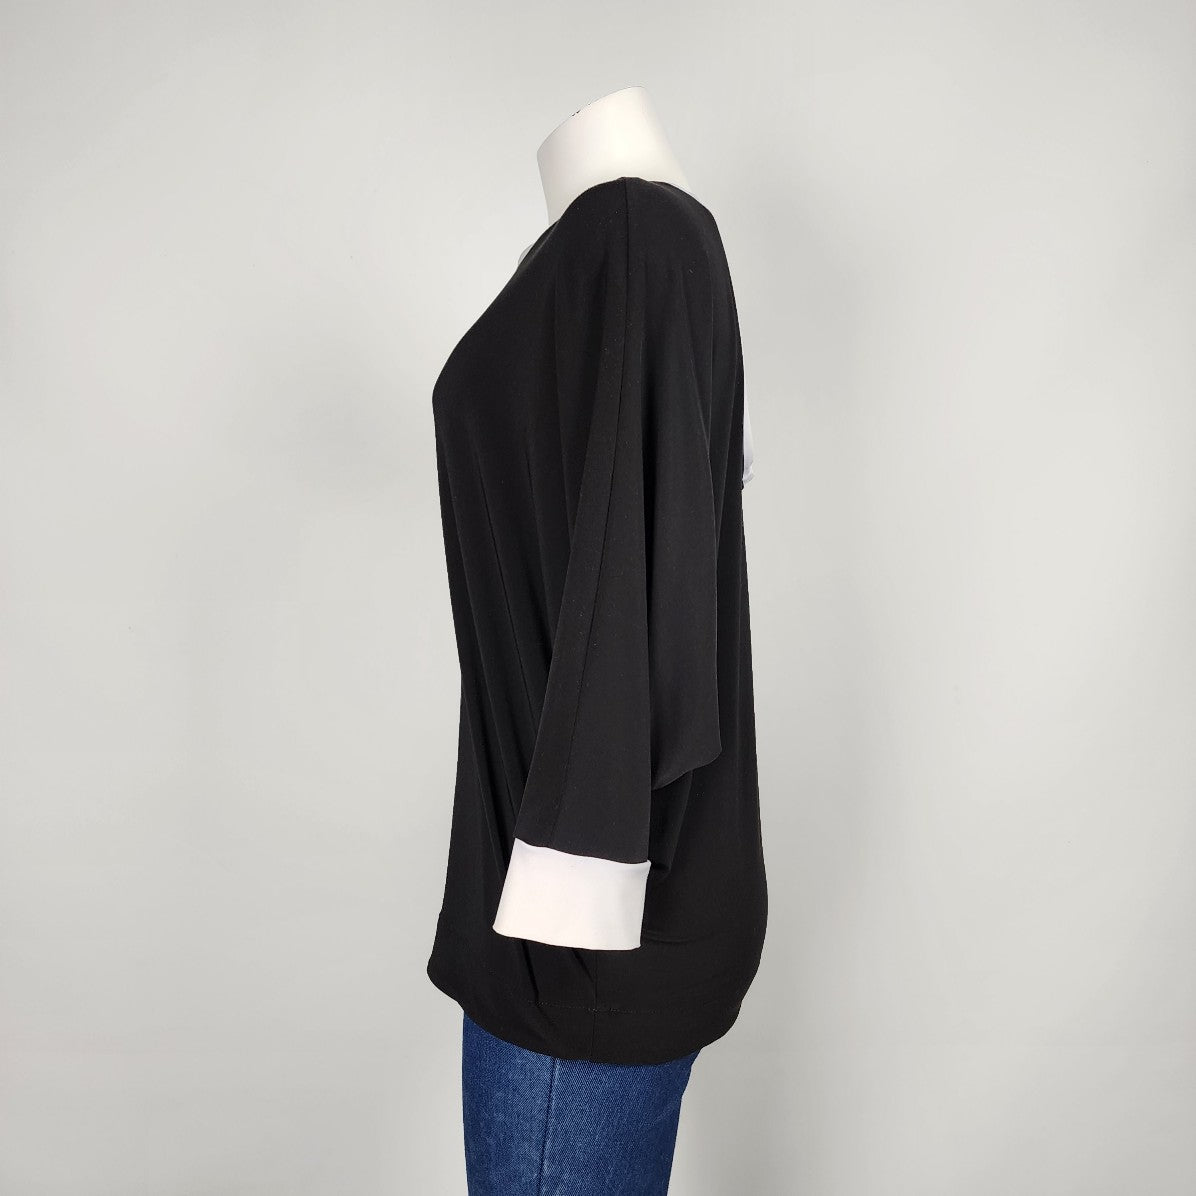 Black & White Batwing Sleeve Top Size M